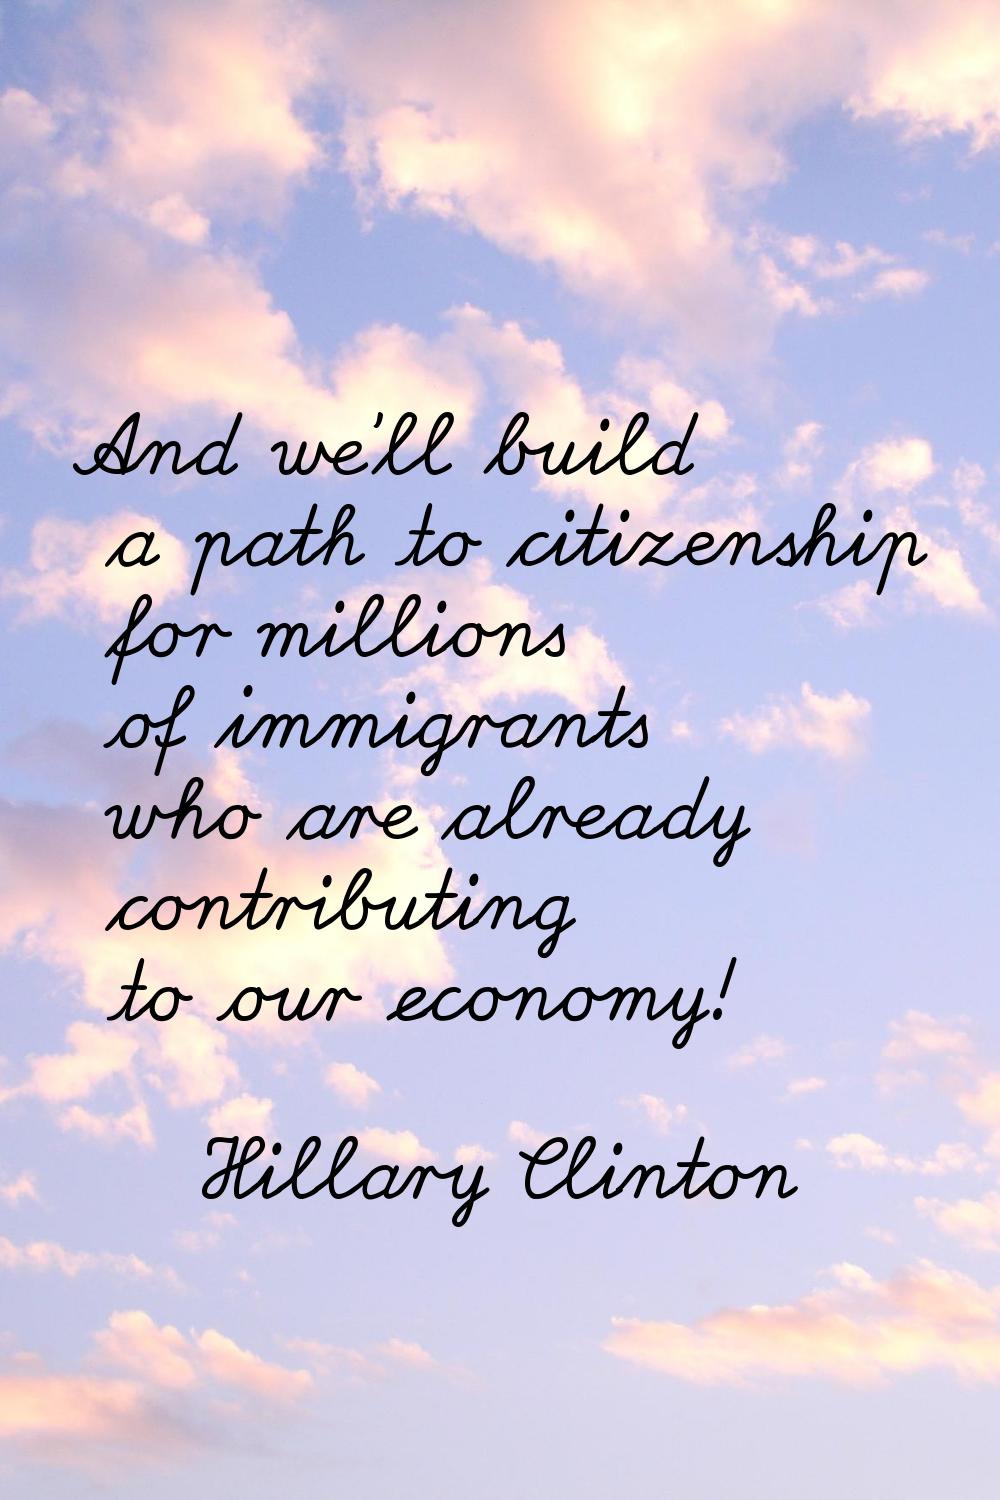 And we'll build a path to citizenship for millions of immigrants who are already contributing to ou